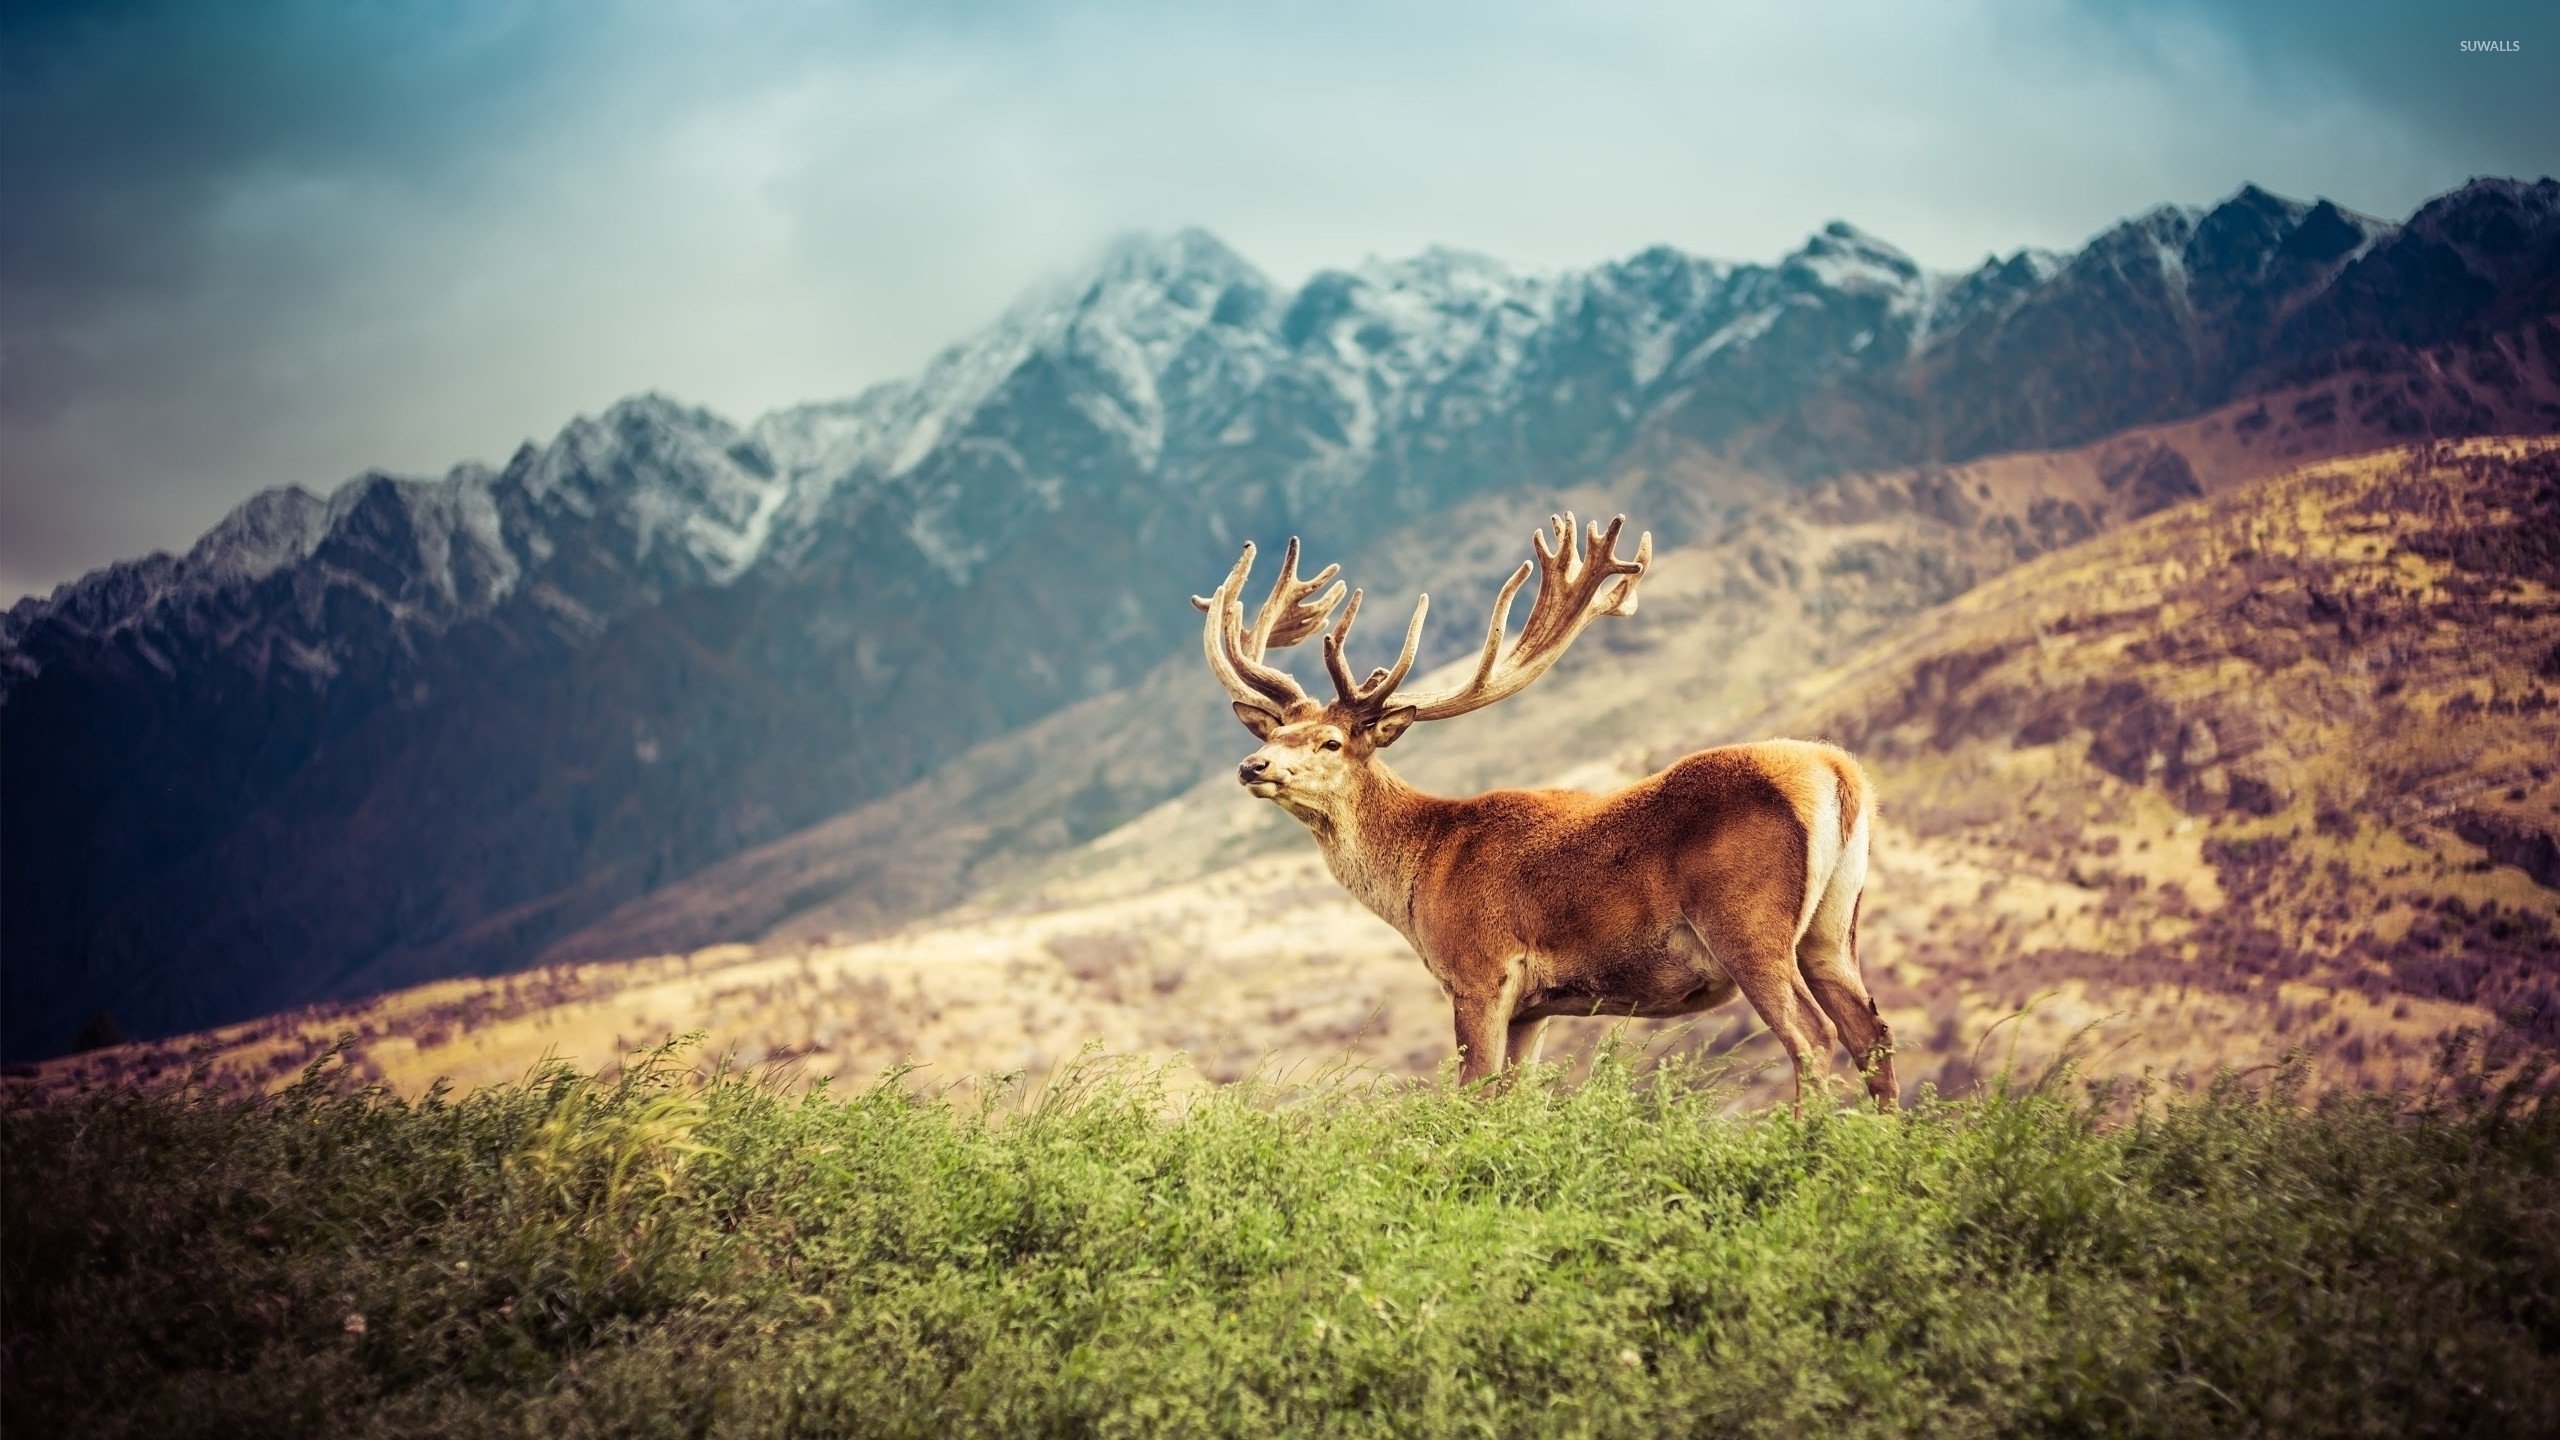 Deer on a green field by the mountains wallpaper